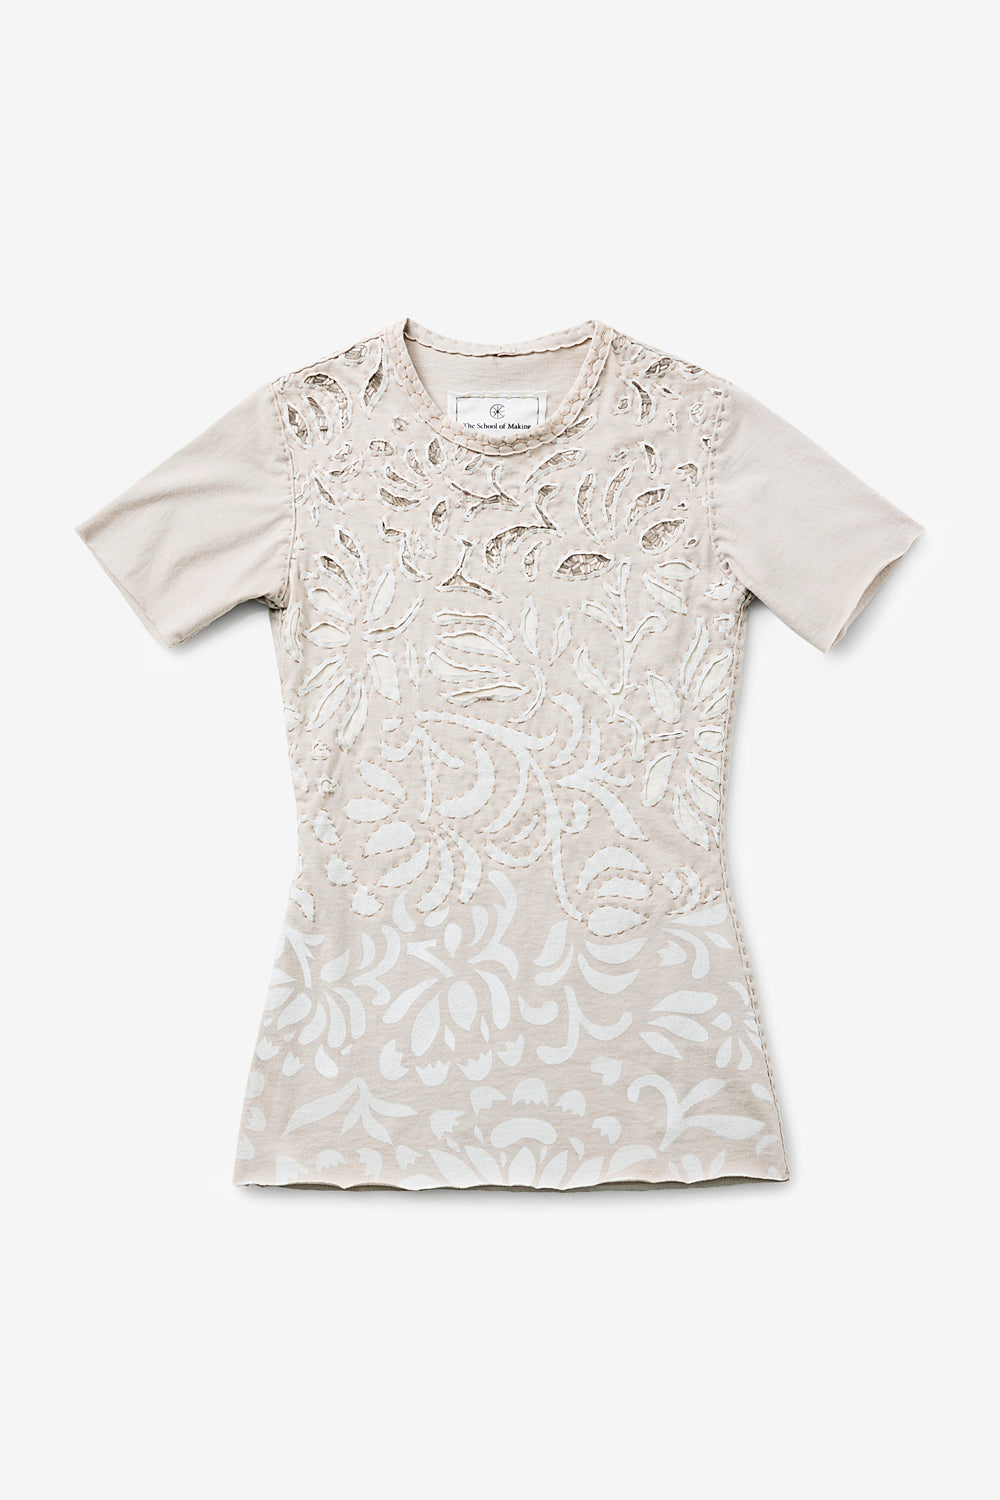 The T-shirt Top with transitional embroidery and beading. Shown in Sand with the Anna's Garden stencil.